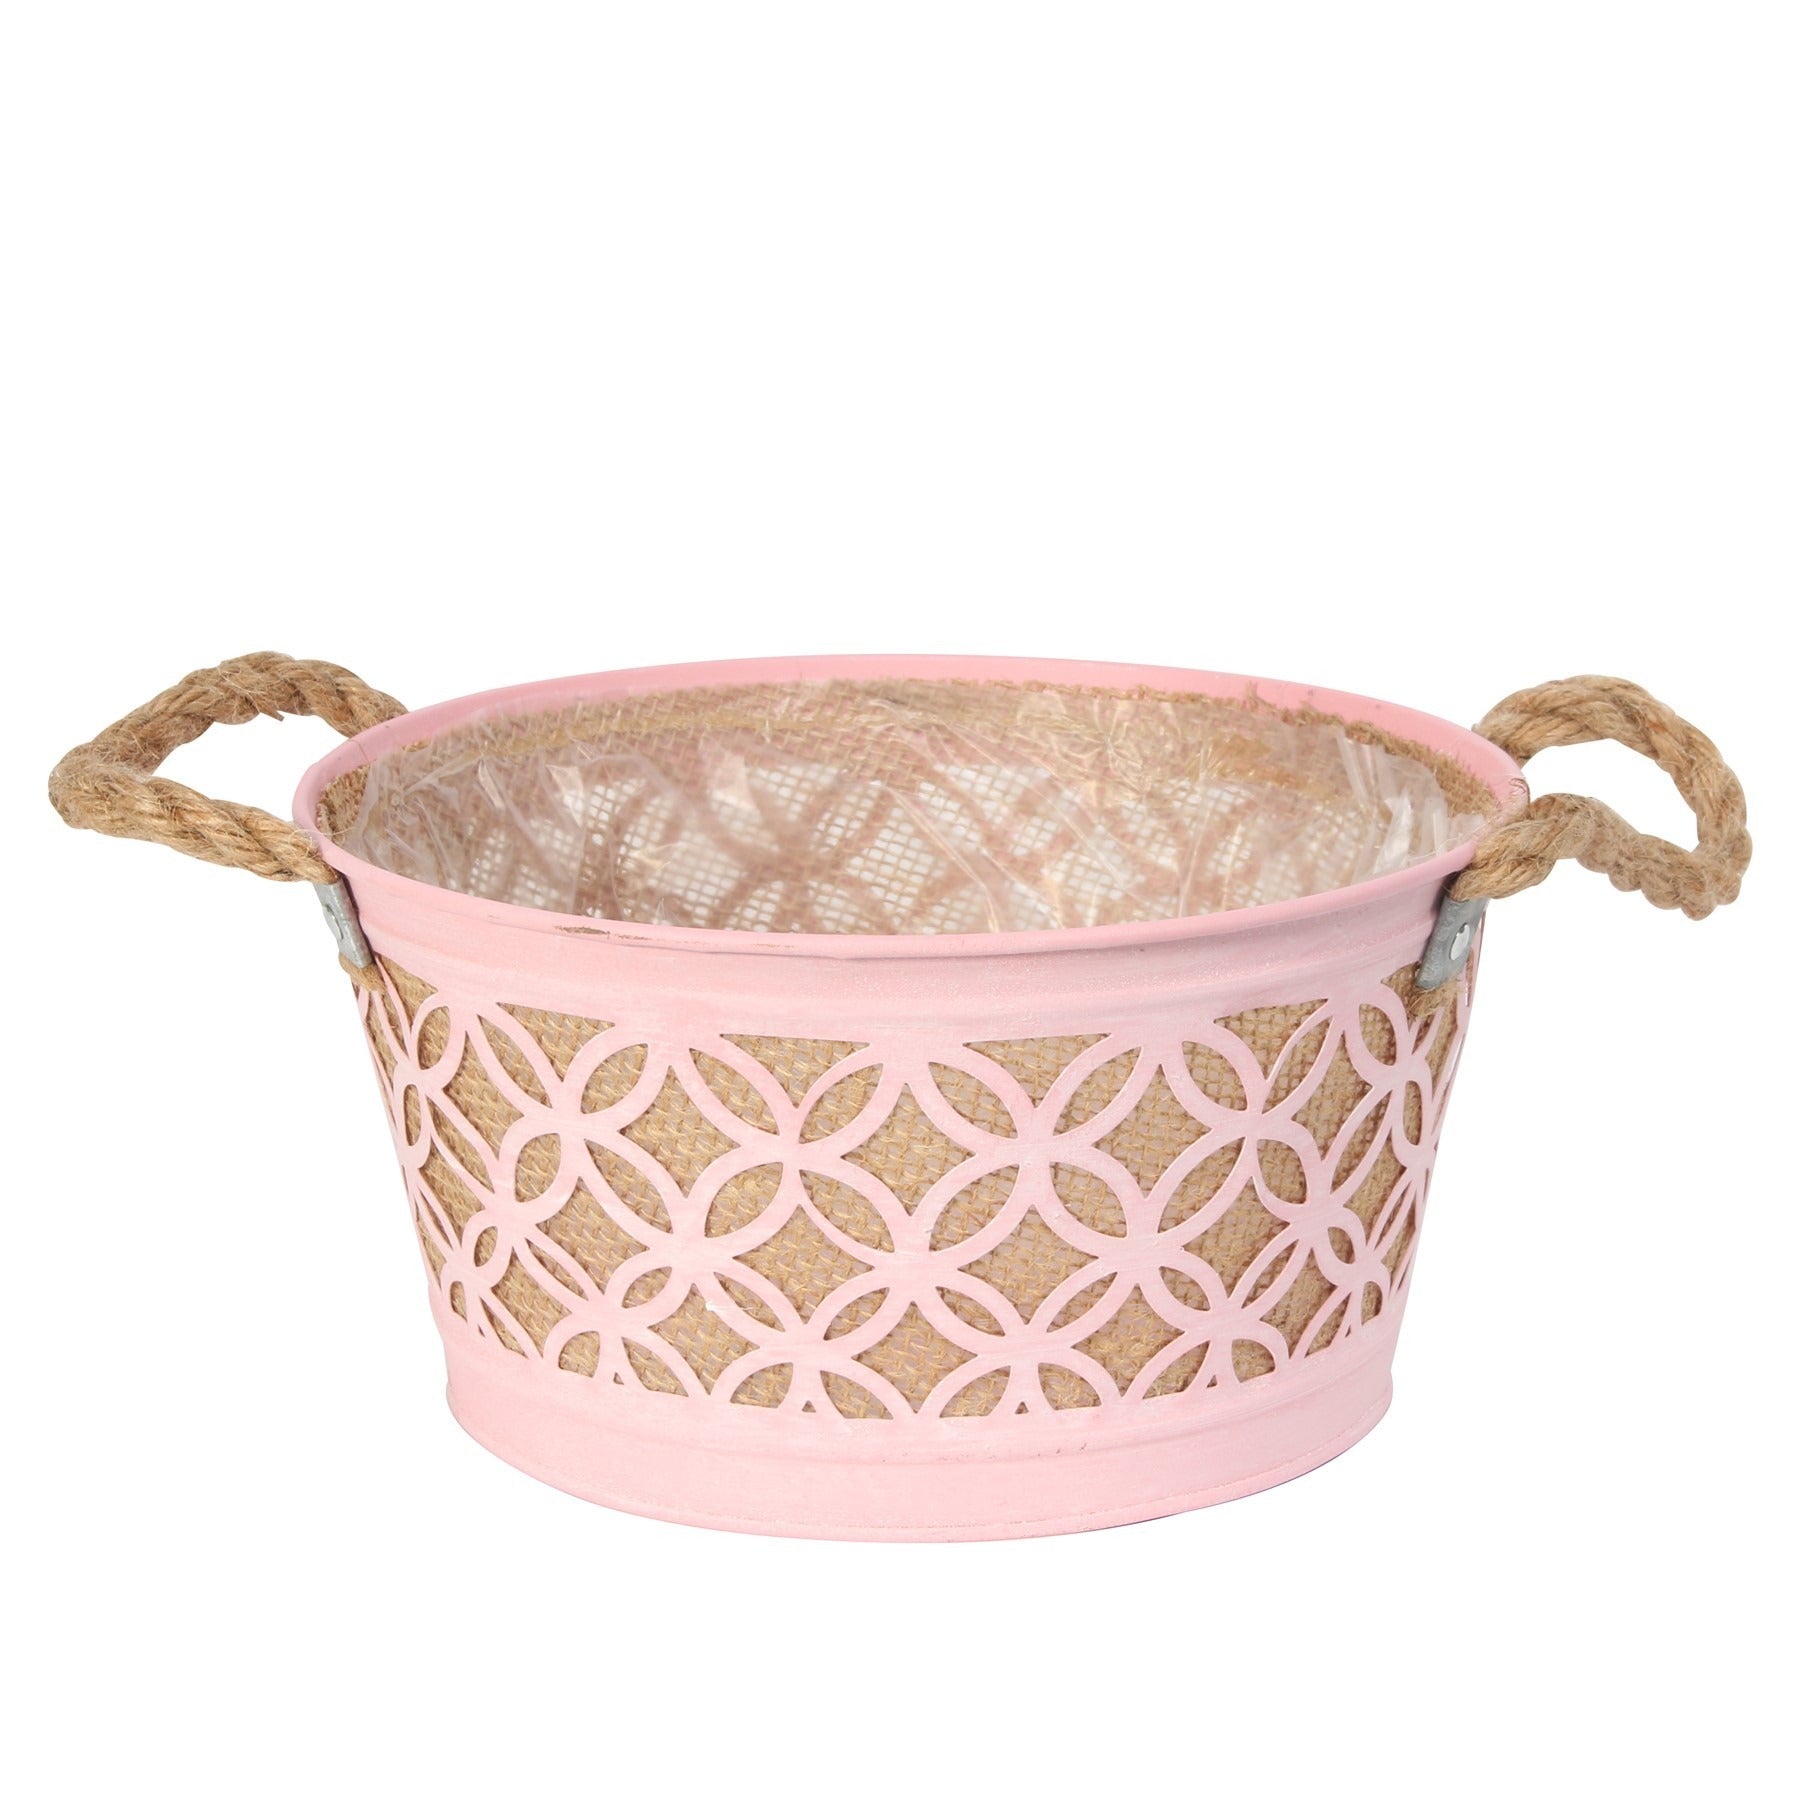 View Round Pink Zinc Planter with Hessian Liner Rope Handles information